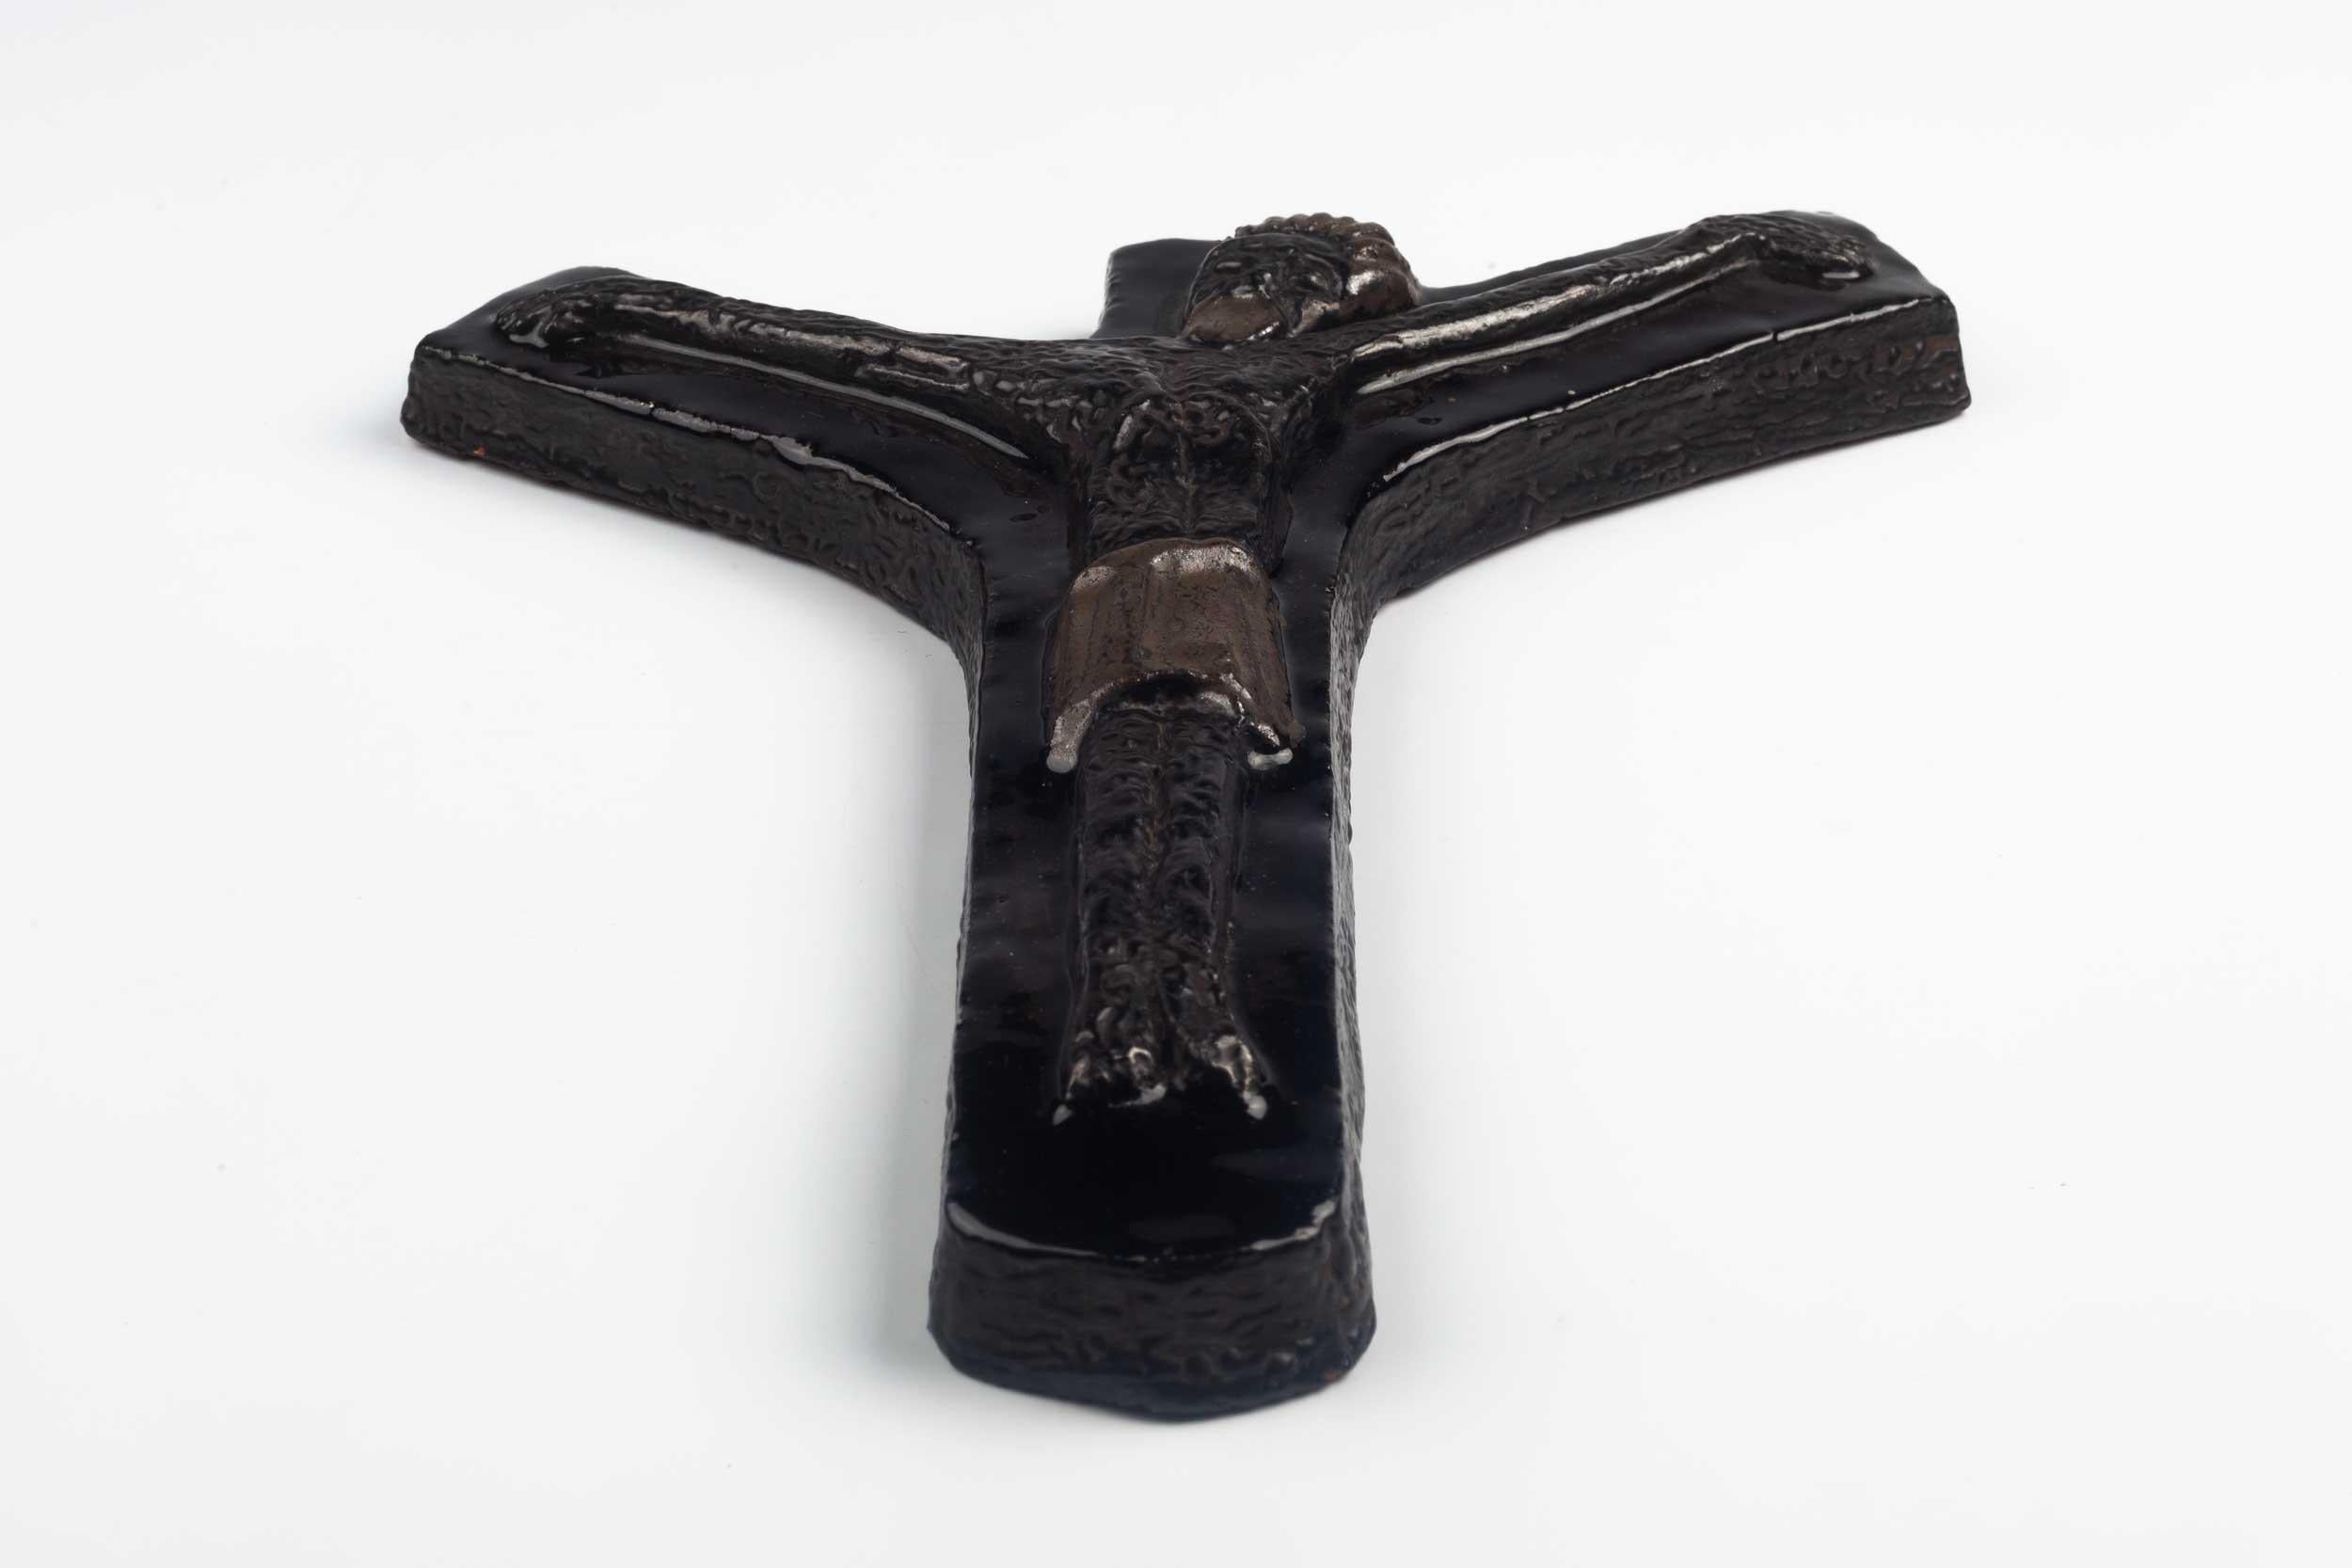 Large glossy brown ceramic wall cross, handmade in Europe in the 1960s. Asymmetrical cross shape with a figurative and textured Christ figure. A one-of-a-kind, handcrafted piece that is part of a large collection of crosses made by Belgian artisan